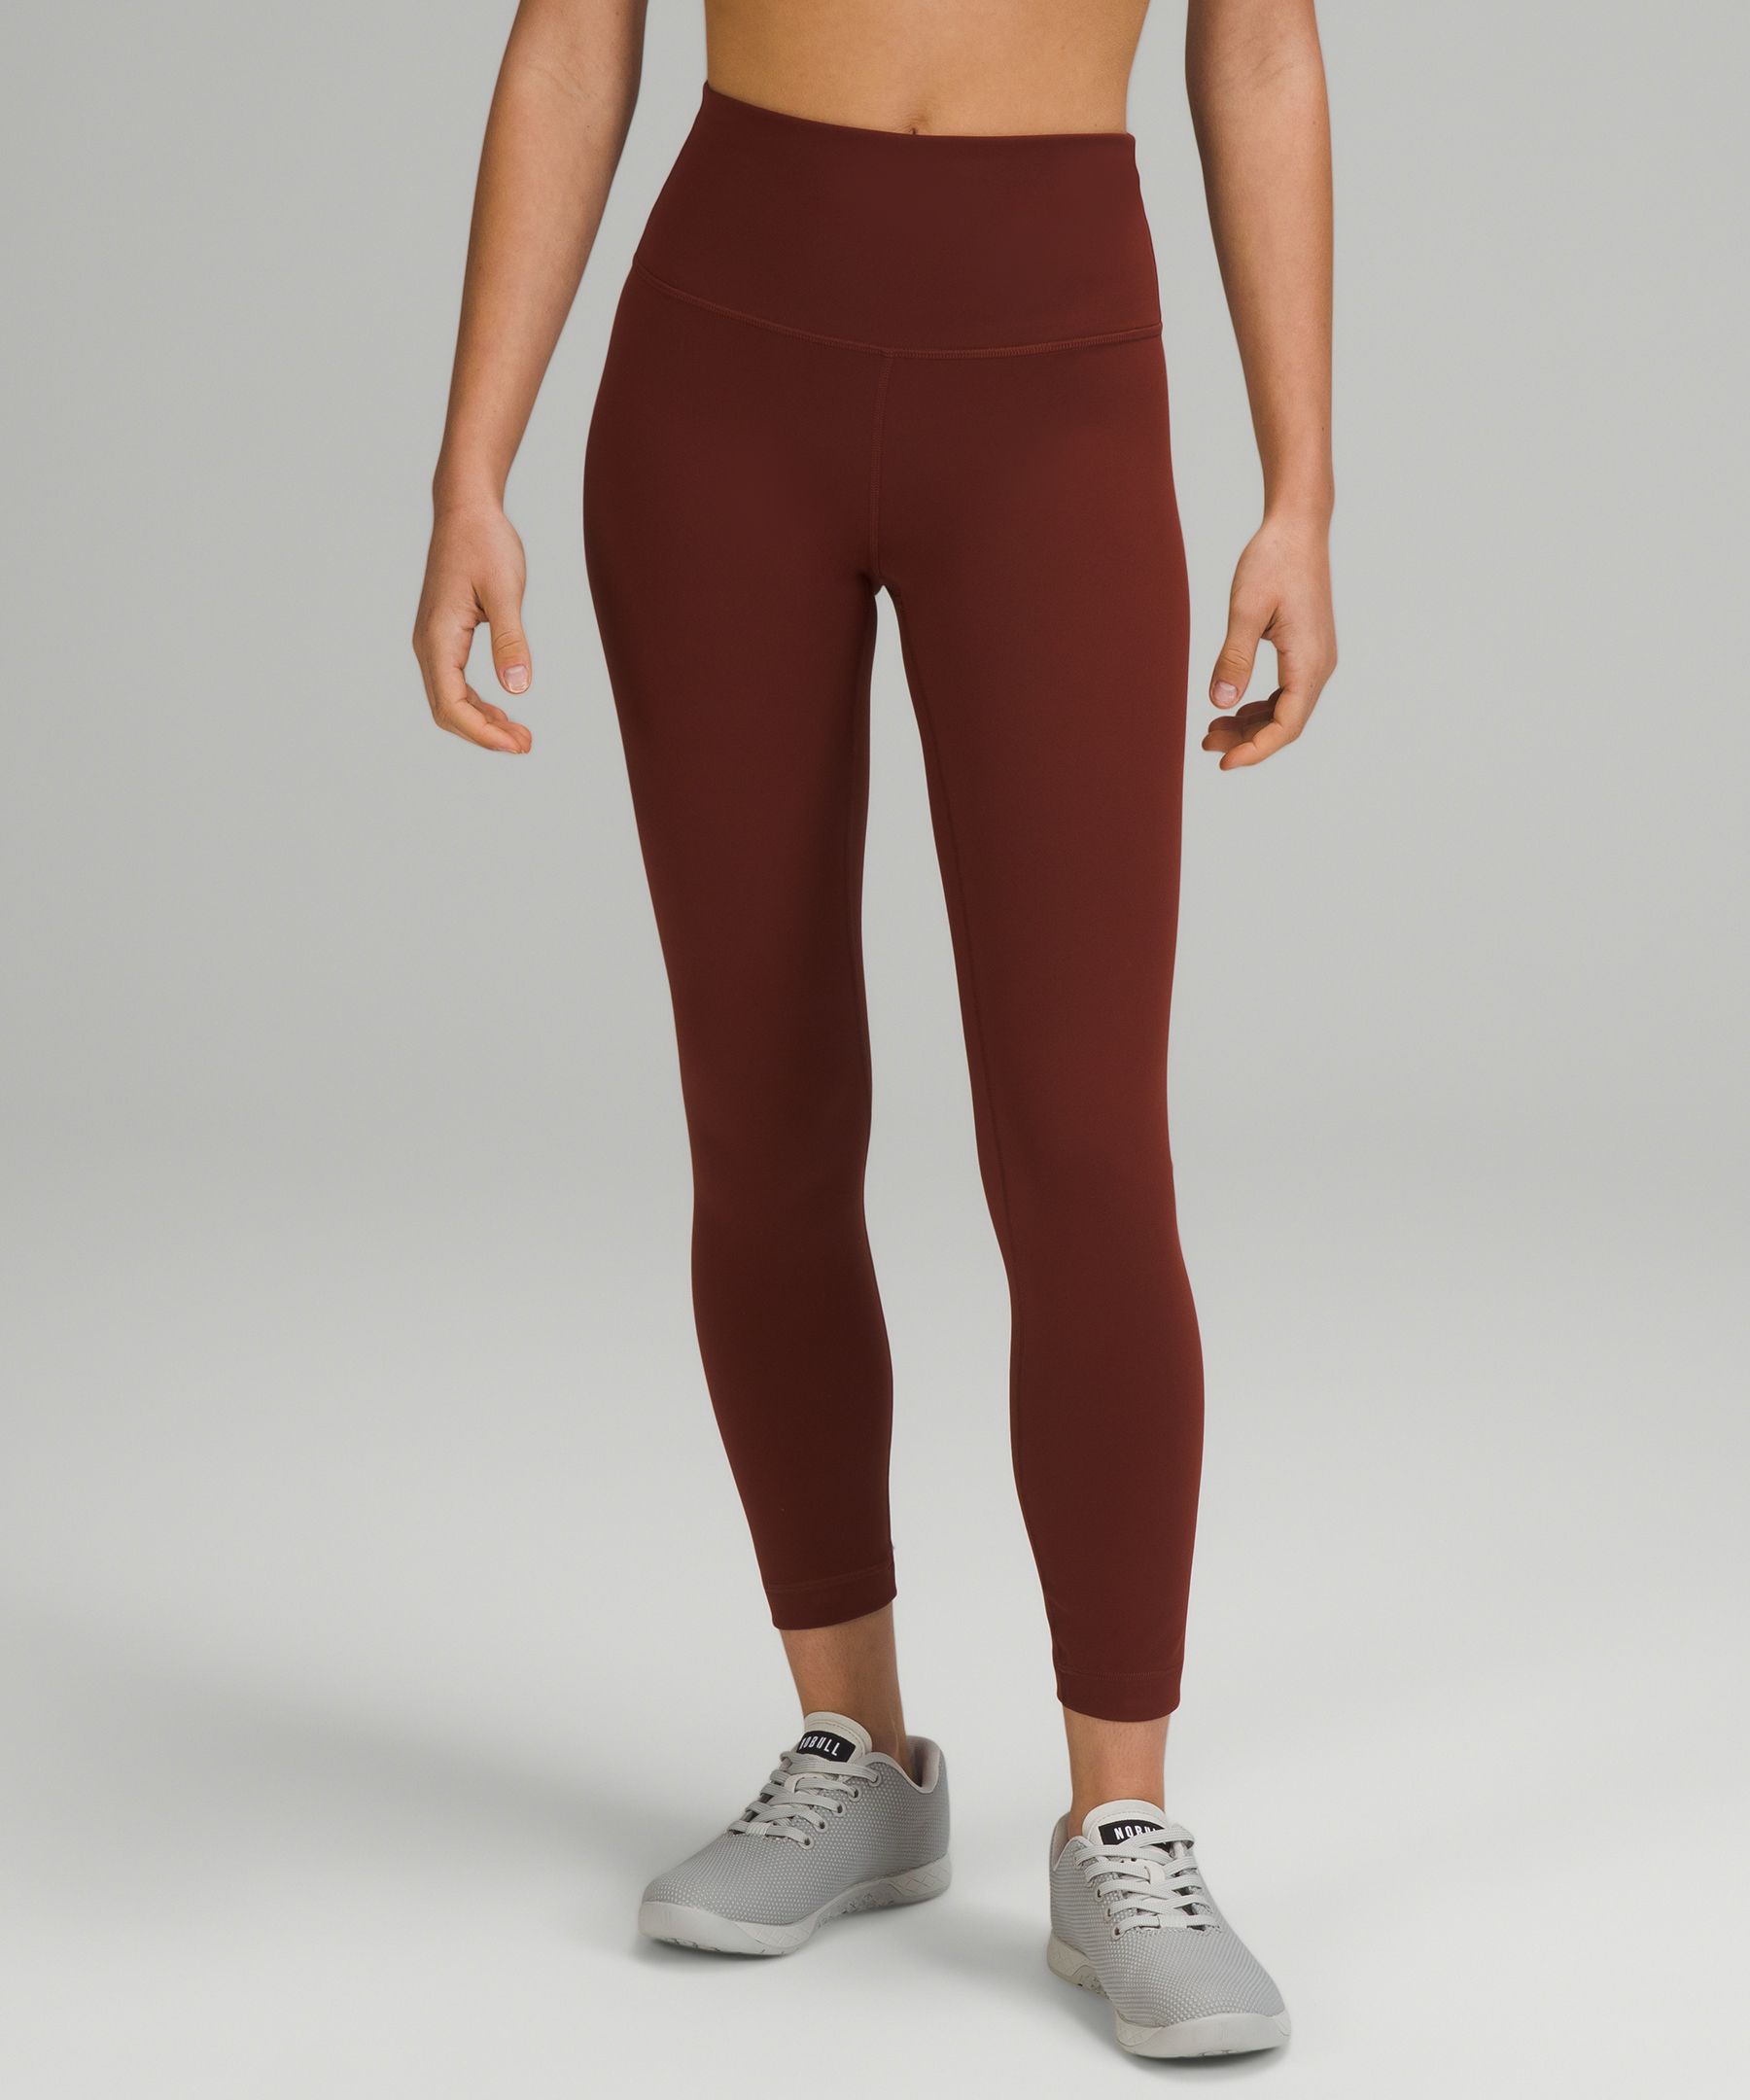 Lululemon Wunder Train High-rise Tights 25" In Date Brown